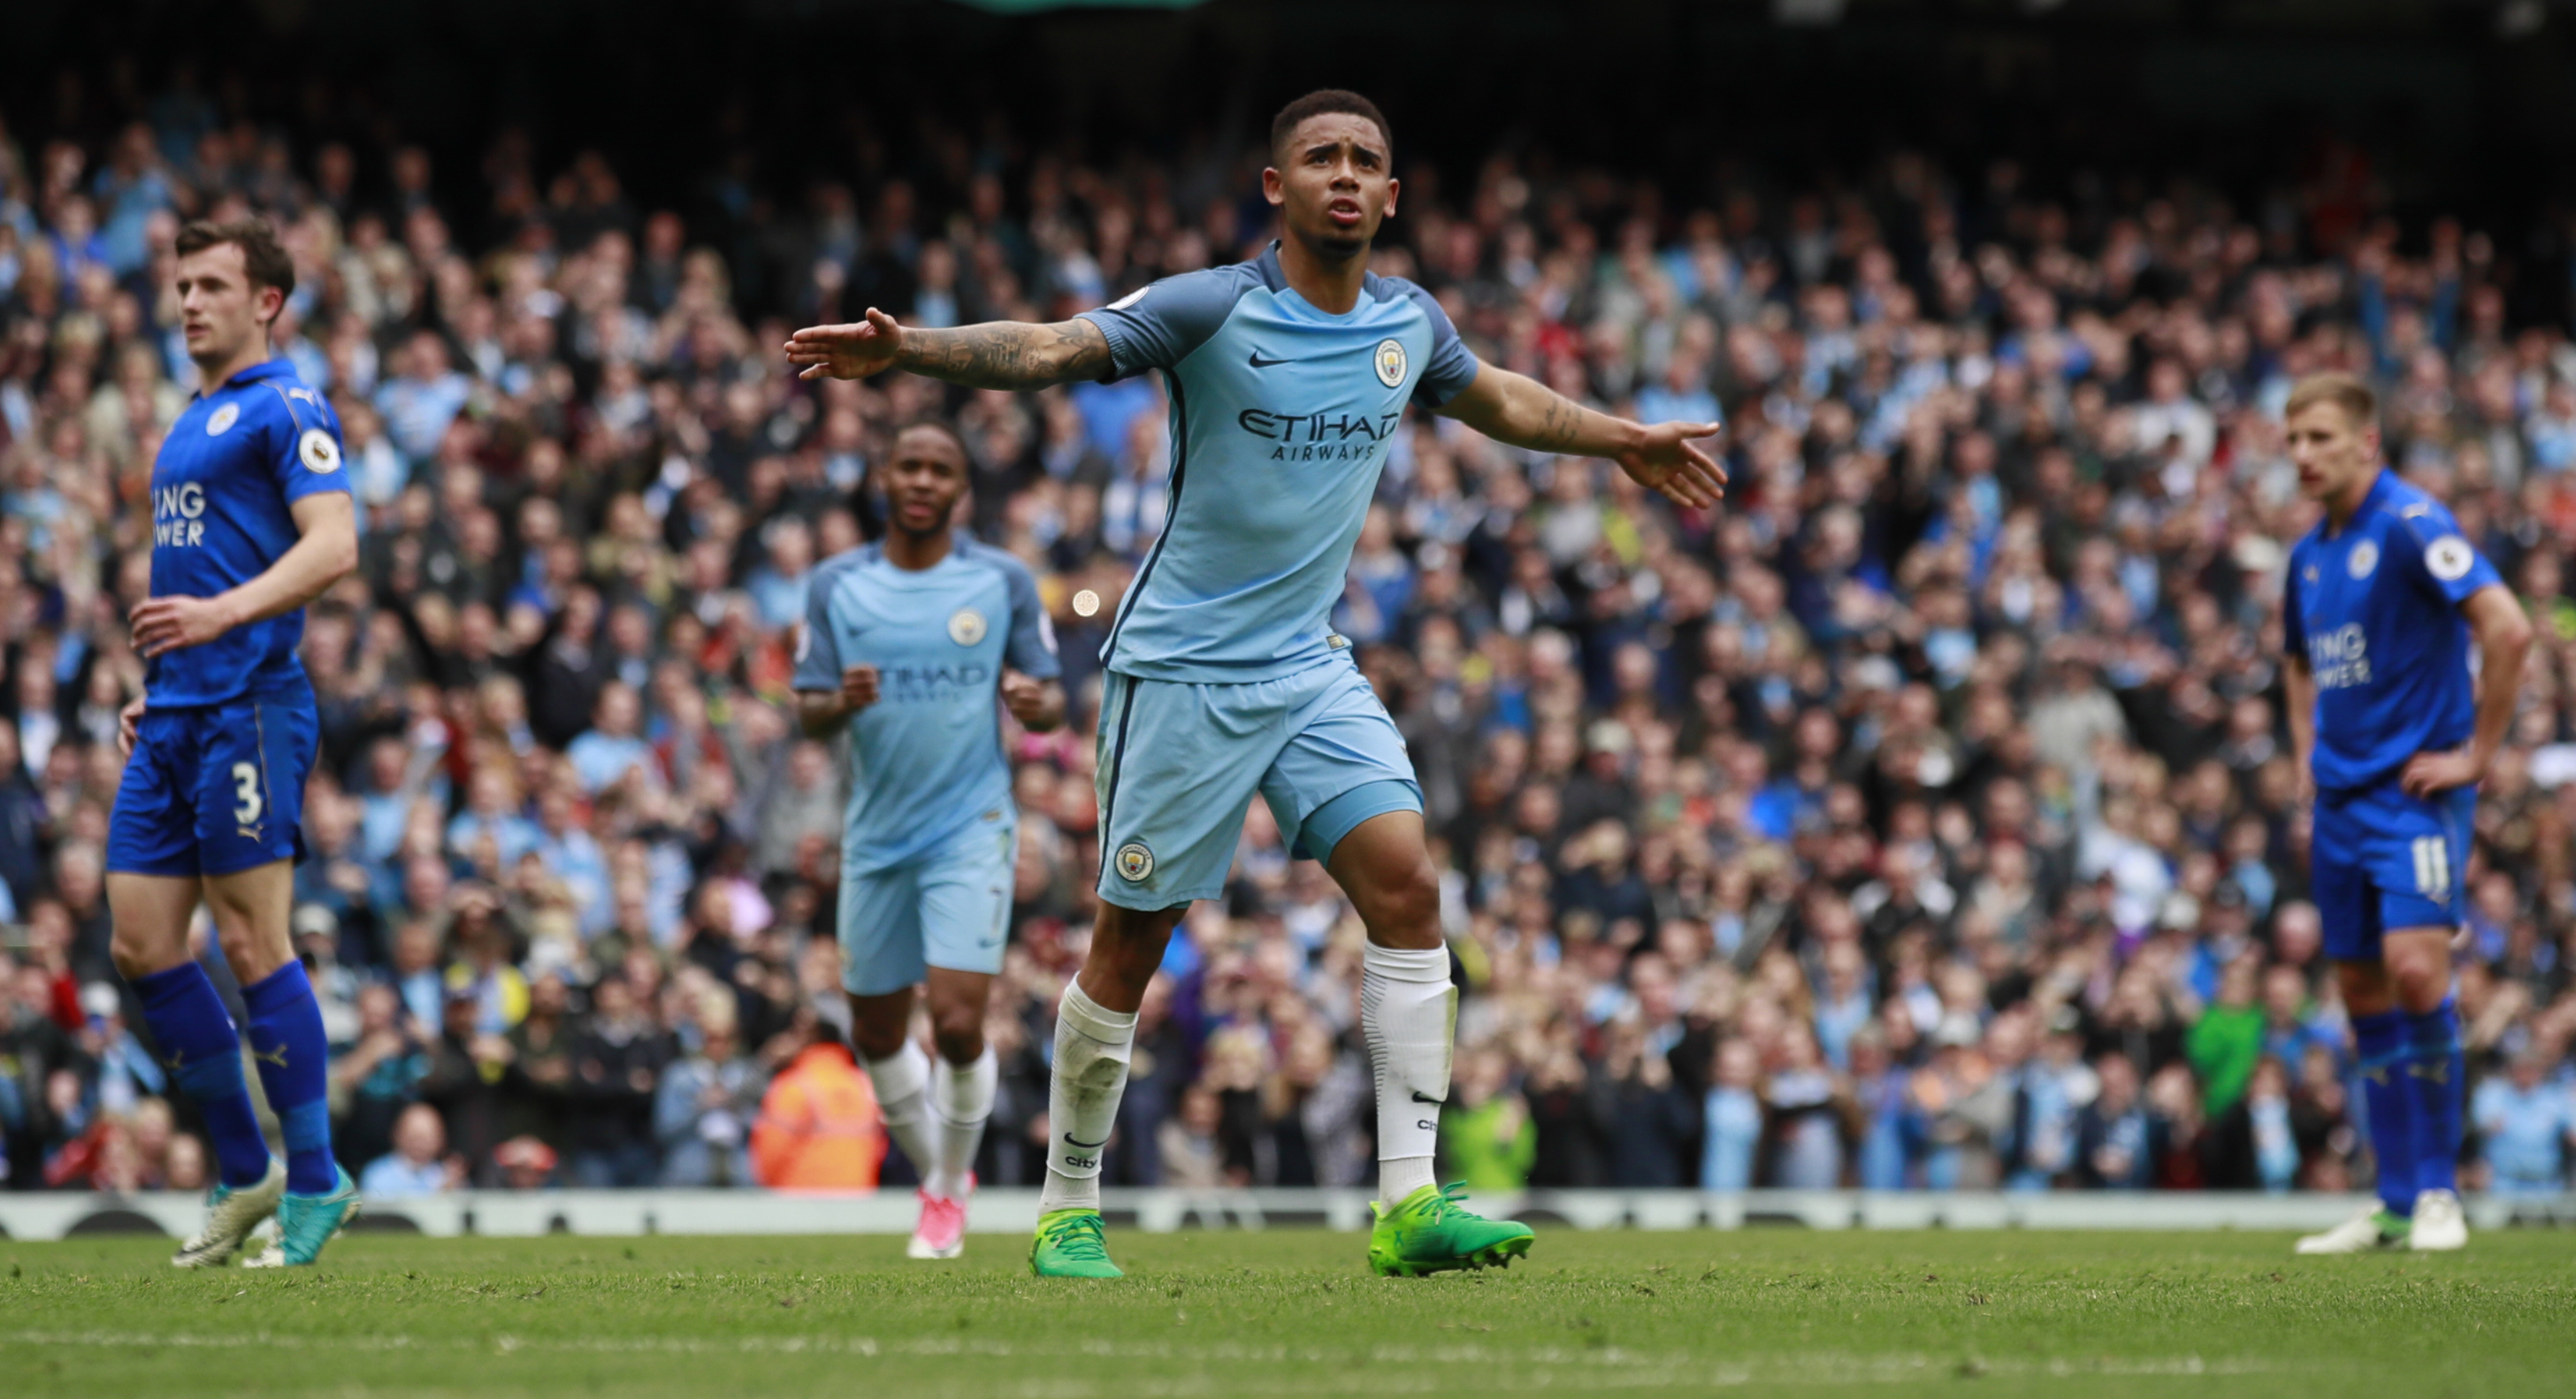 Football: Man City hang on to beat Leicester and move third